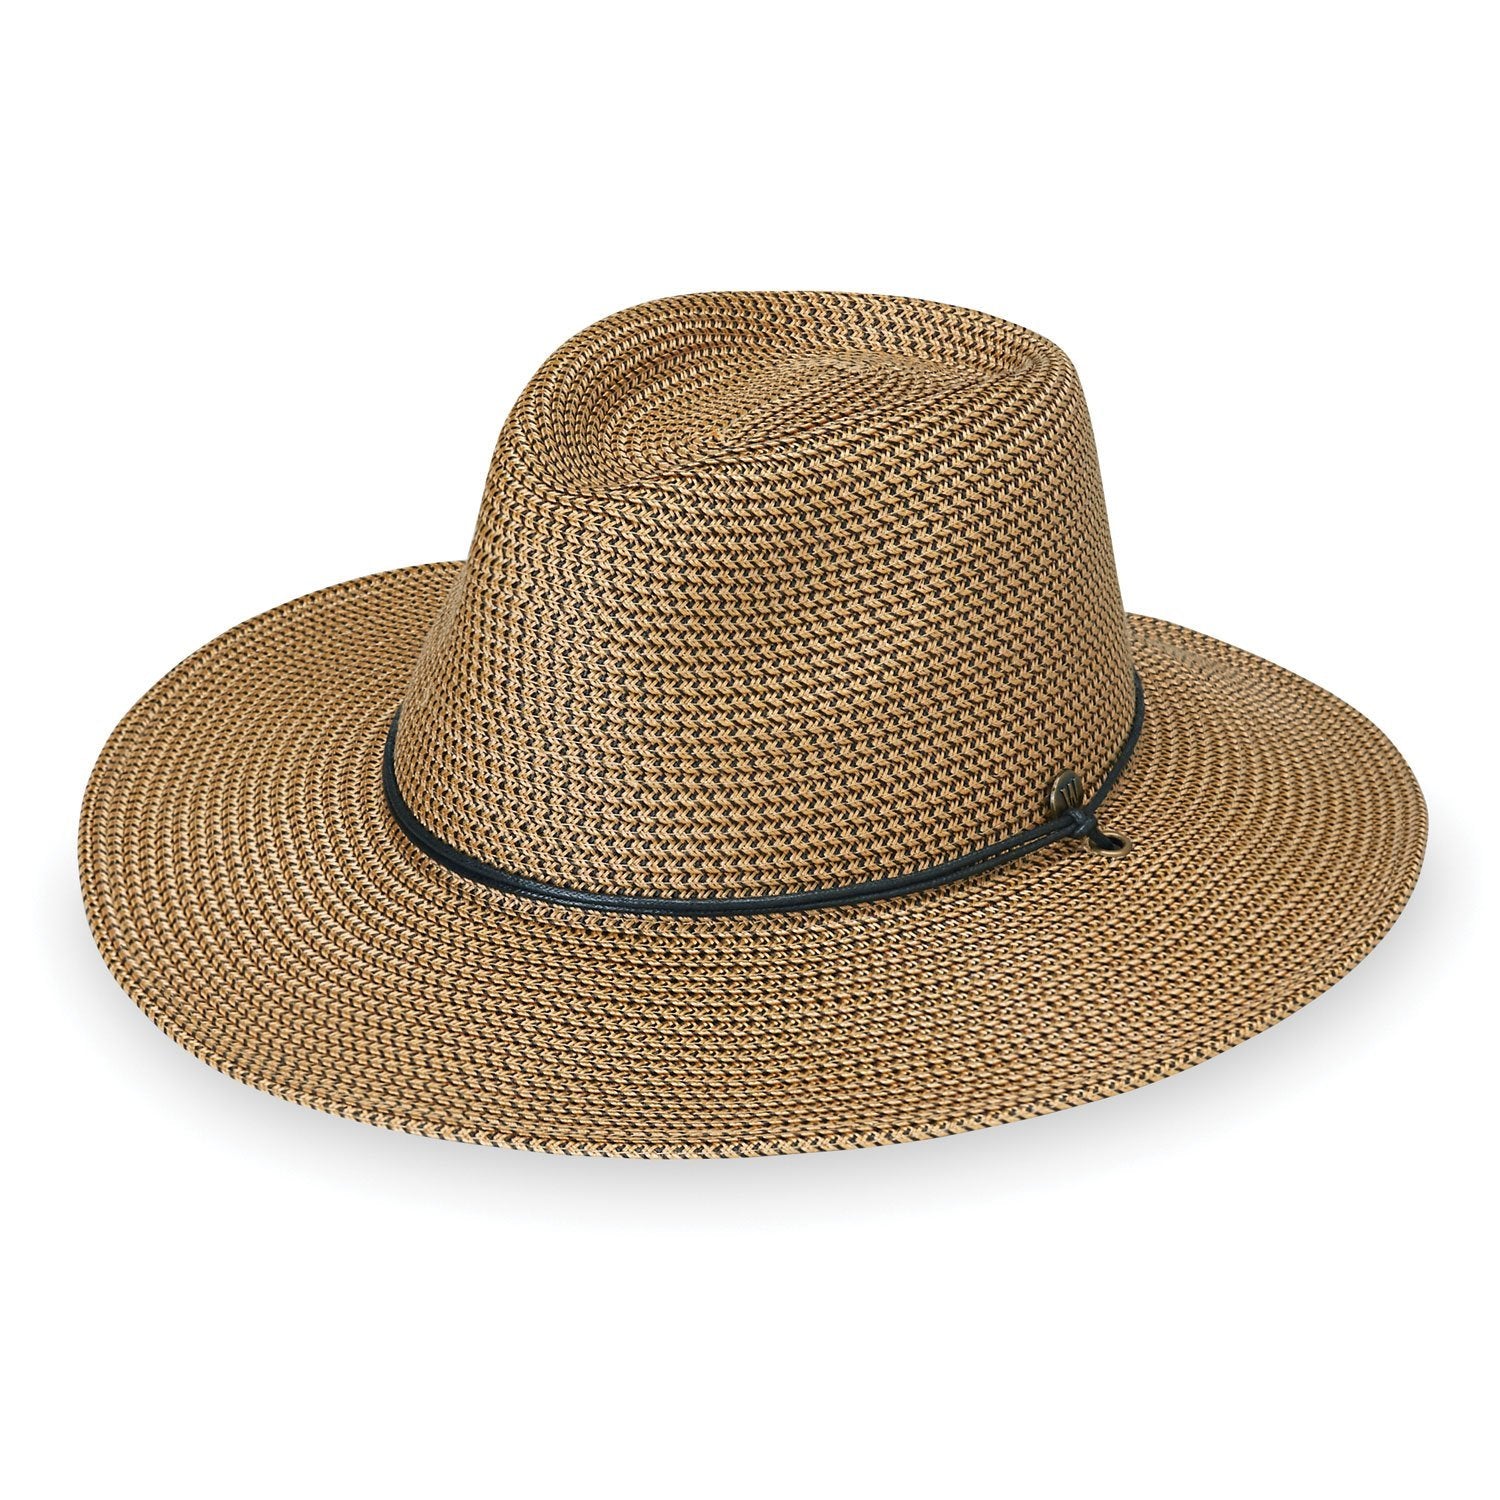 Featuring Front of Unisex UPF Fedora Style Logan Sun Hat with Chinstrap in Camel from Wallaroo